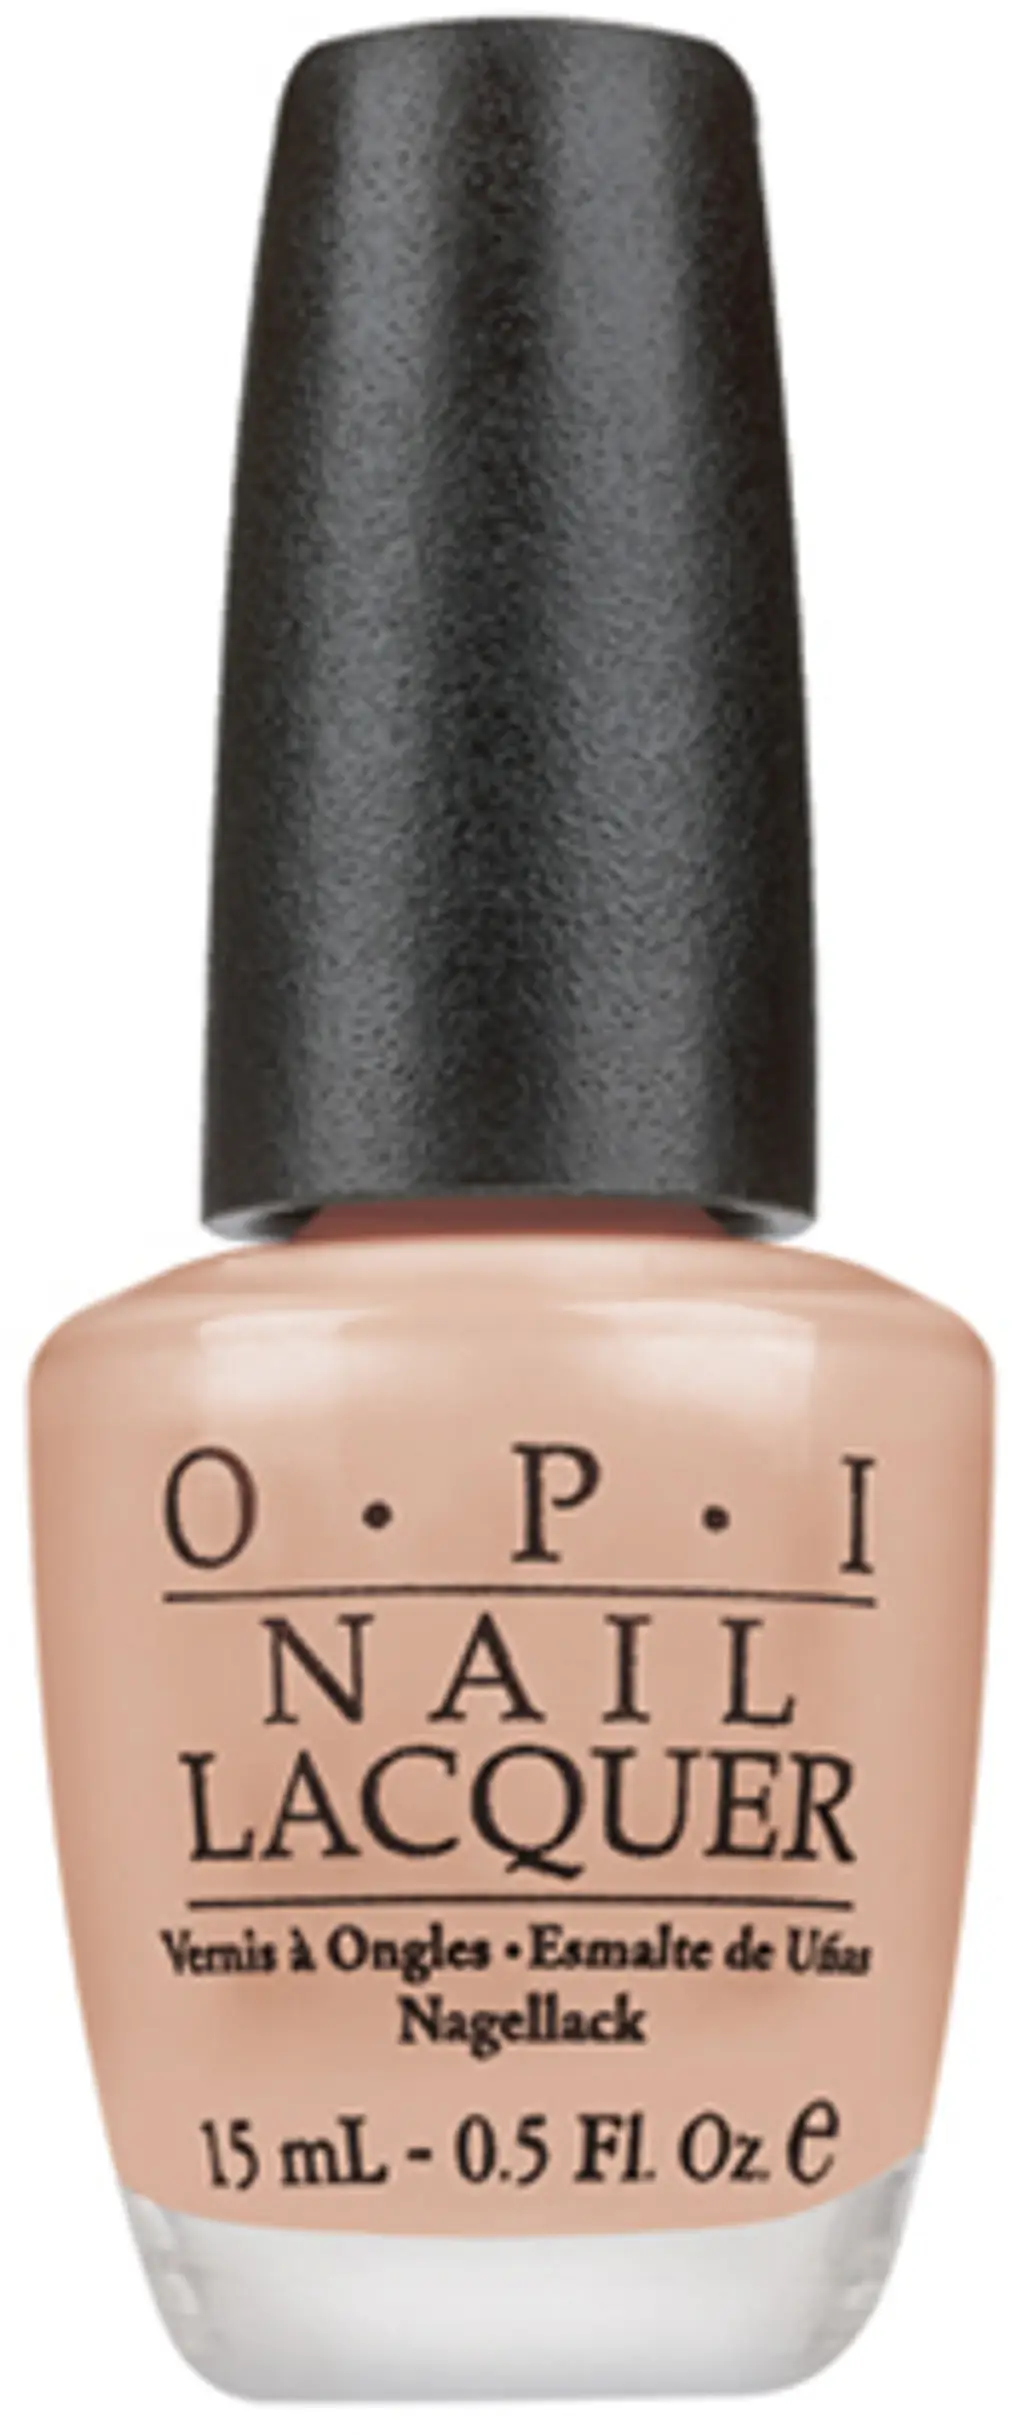 OPI Classic Shades Nail Lacquer in Coney Island Cotton Candy